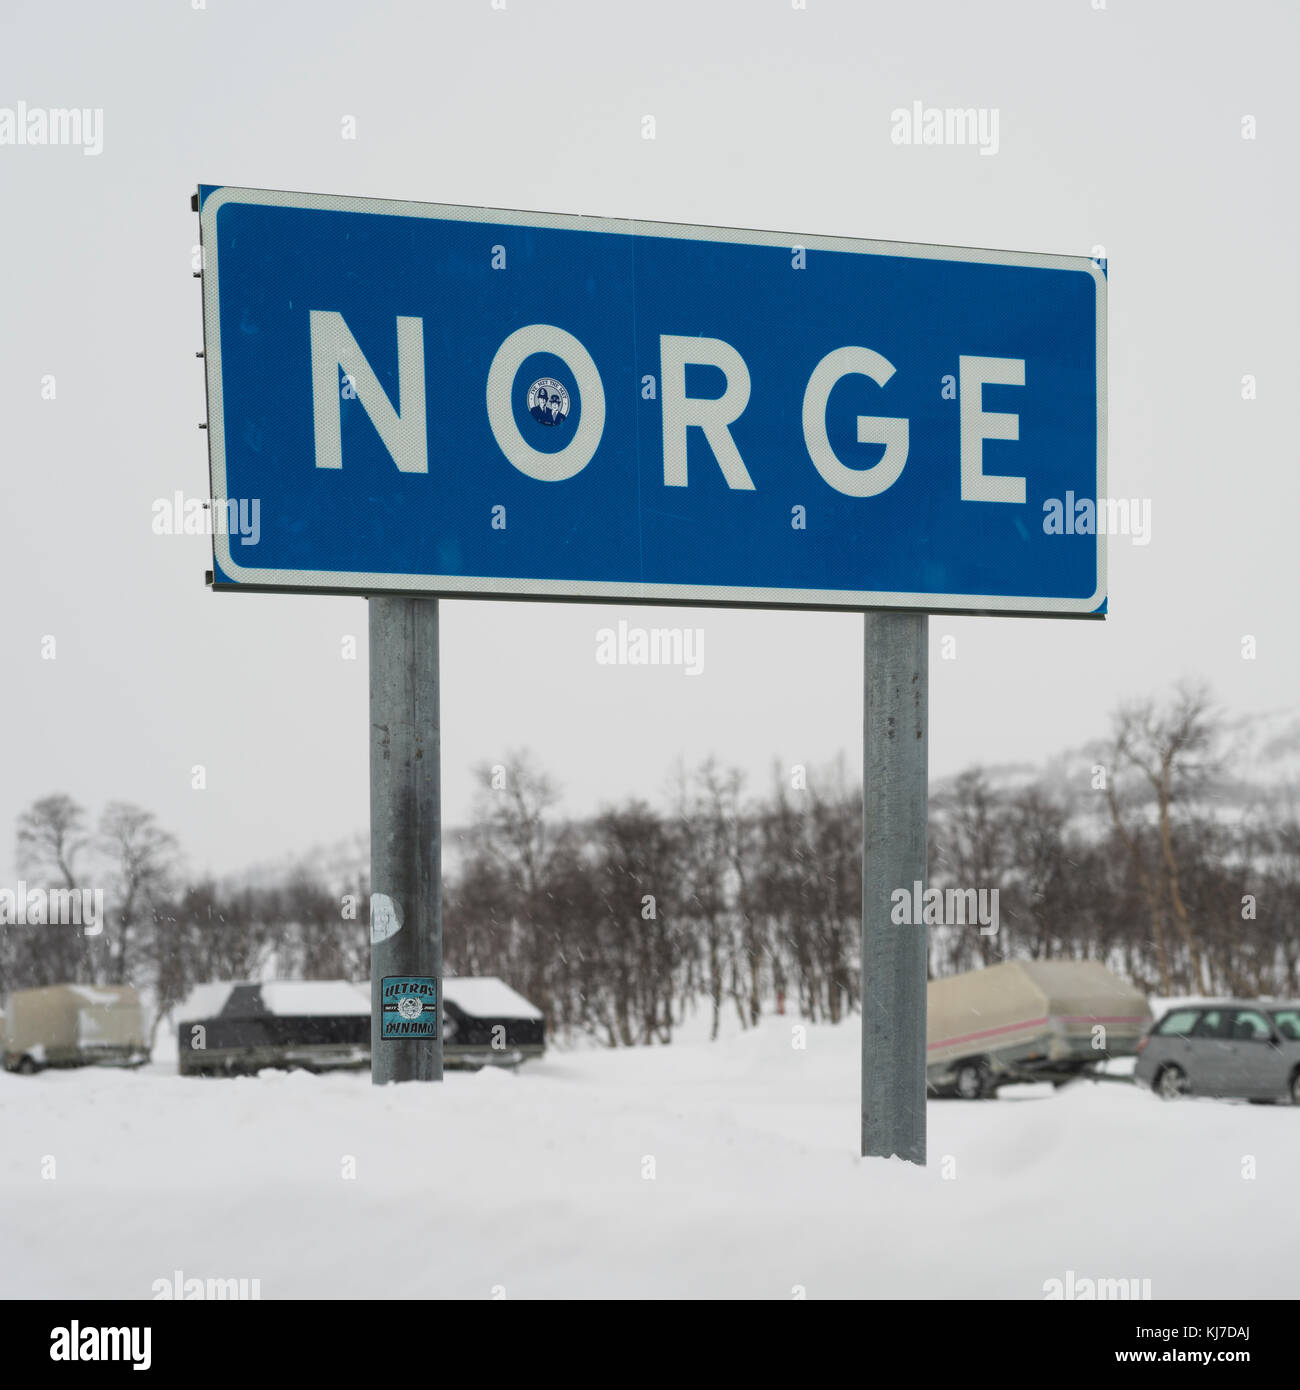 Information sign board on snow, Norrbotten County, Sweden Stock Photo